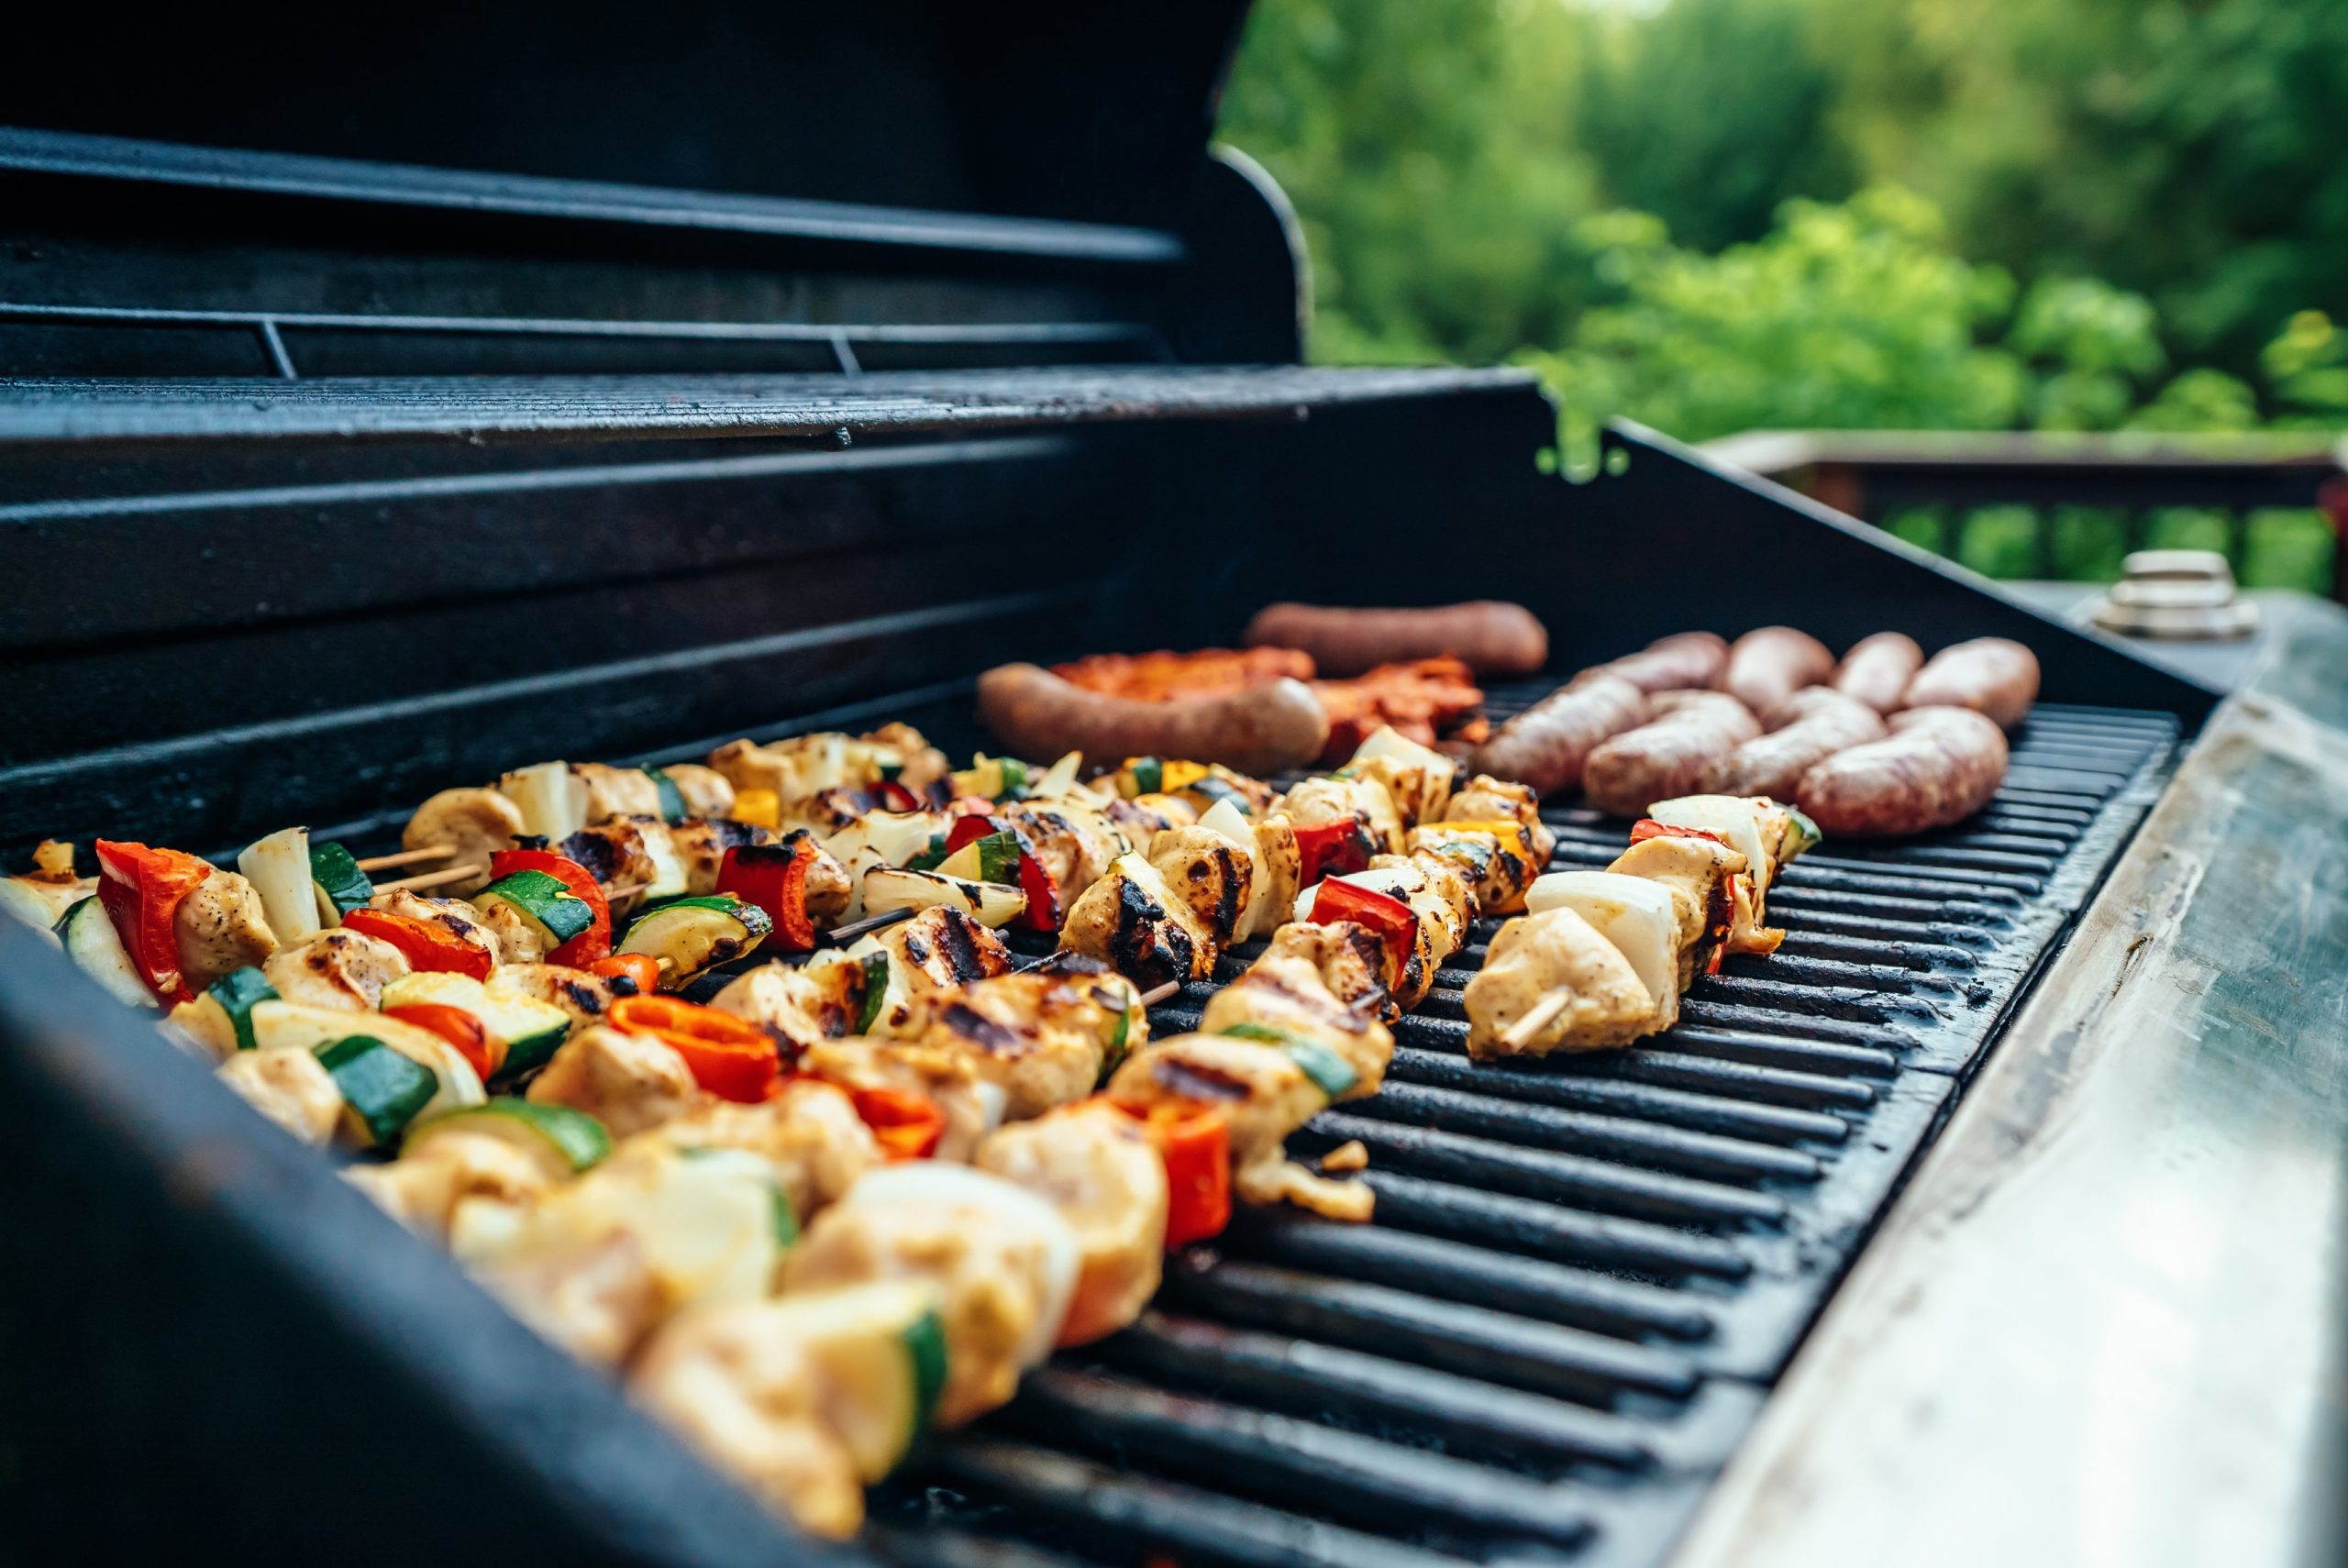 Food on a barbecue grill